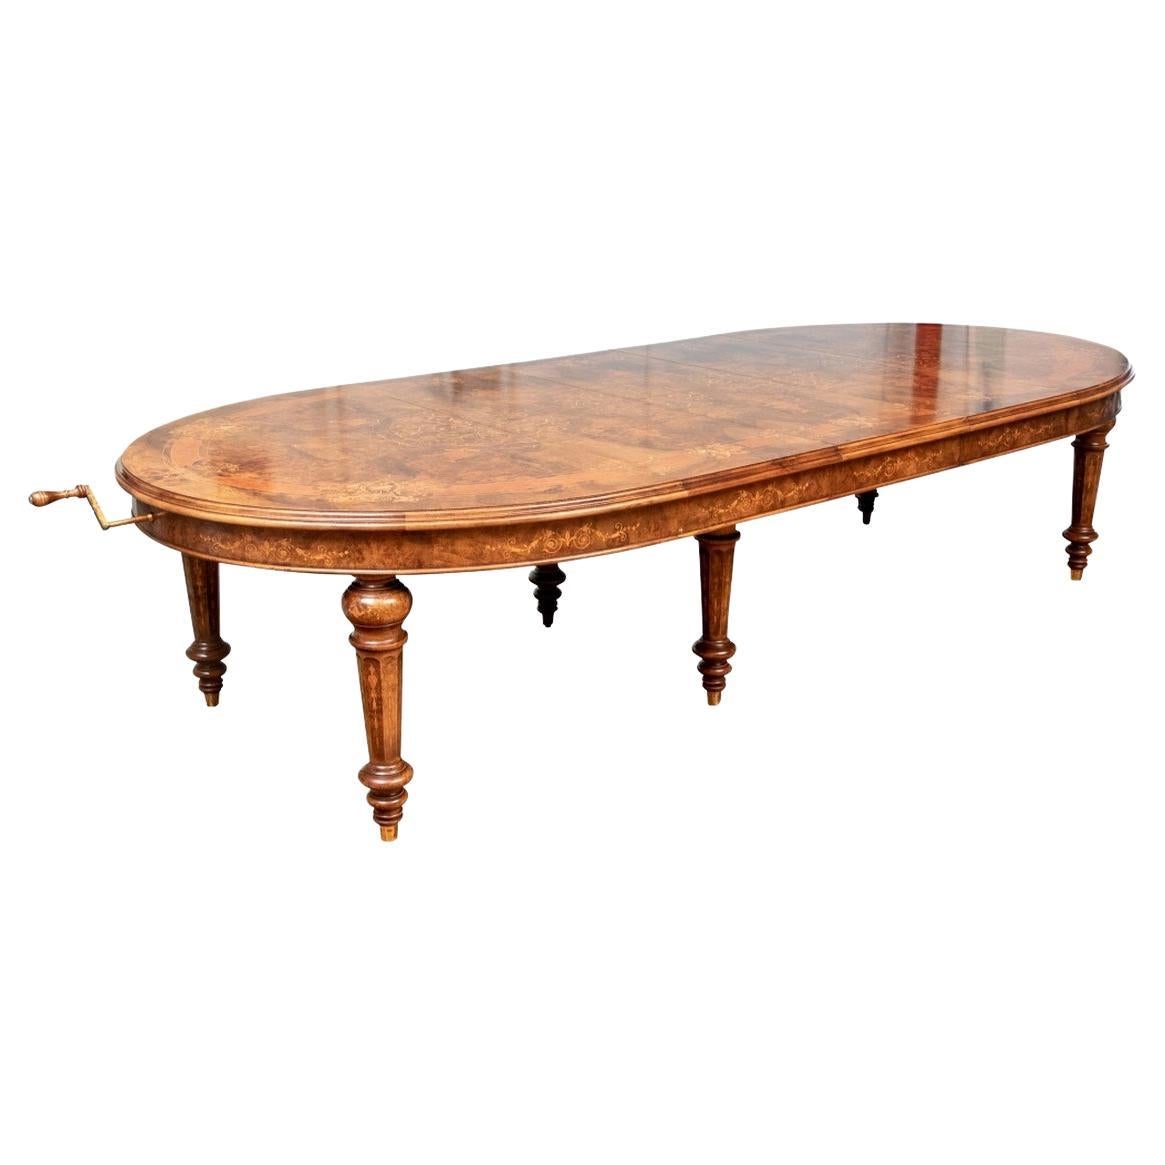 Outstanding Elaborate Antique Inlaid Burled Marquetry Dining Table For Sale